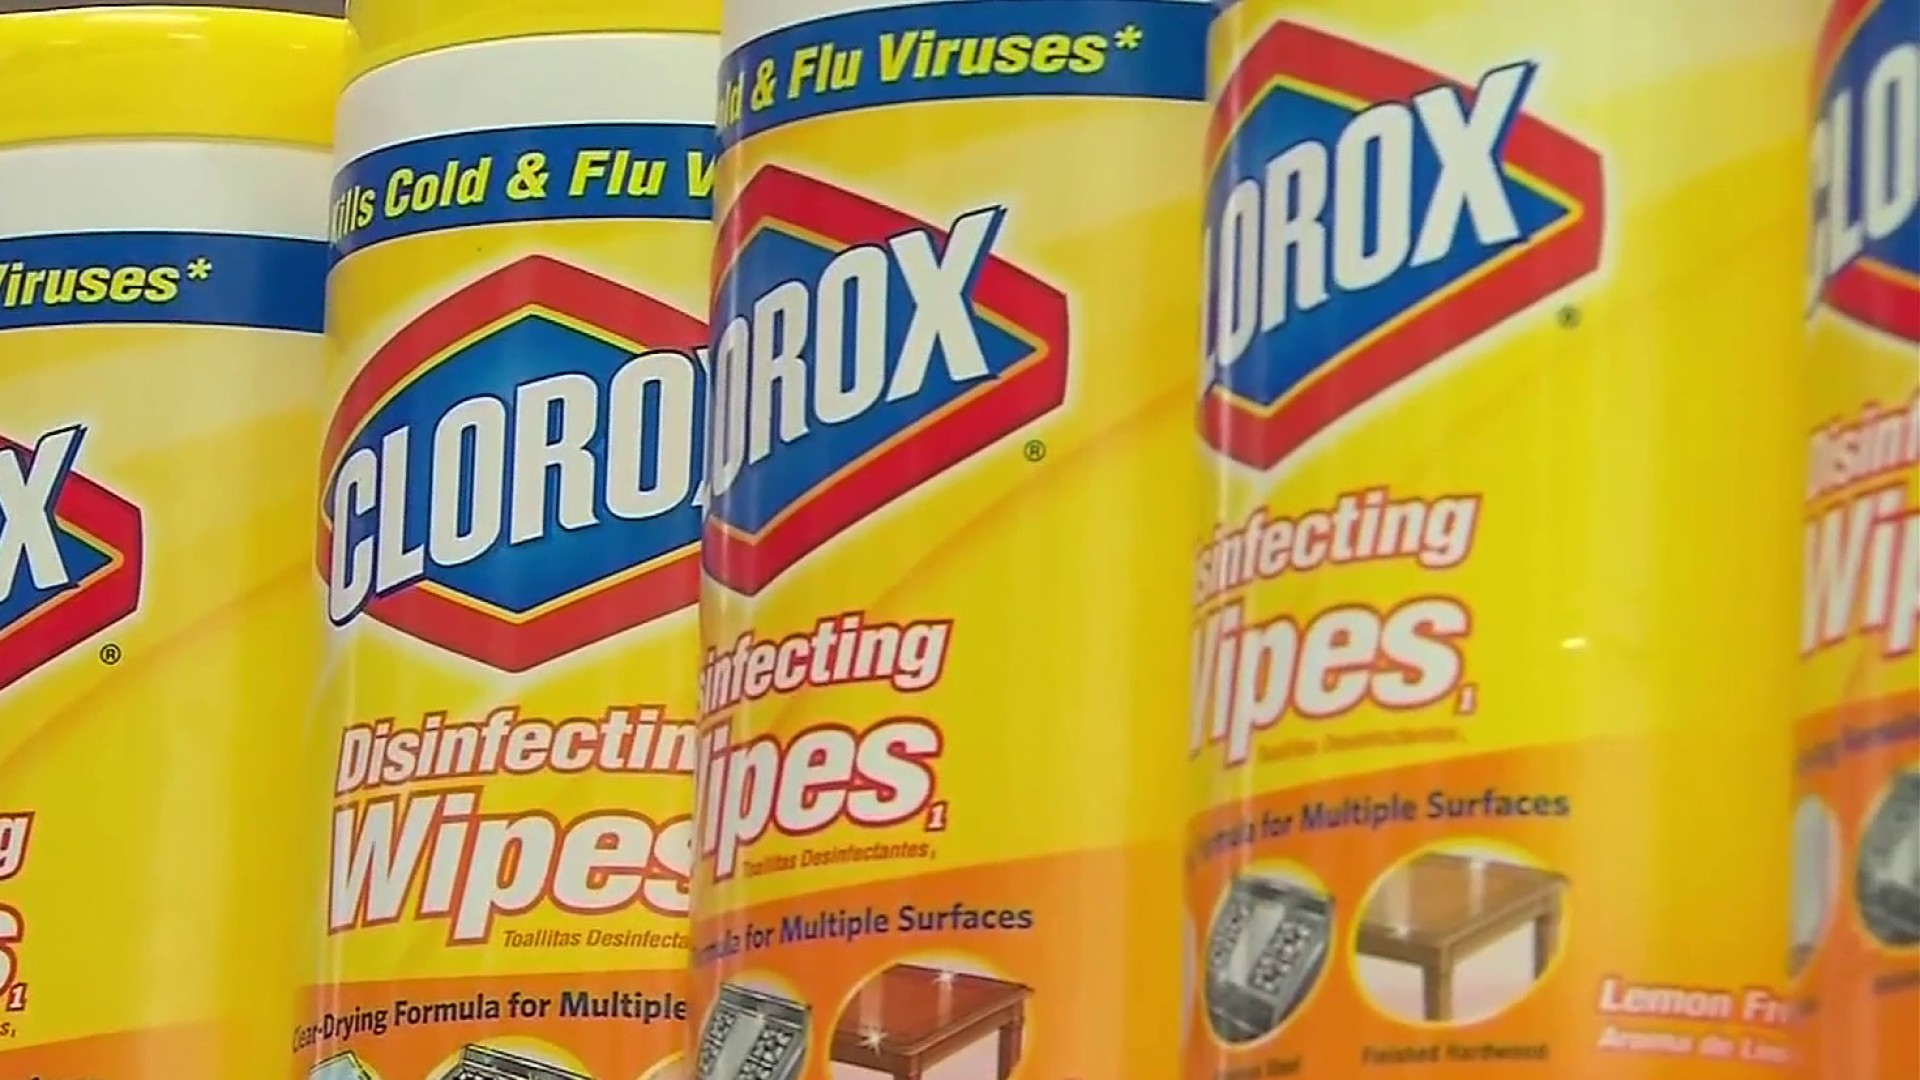 How to clean and disinfect to protect yourself from viruses, flu